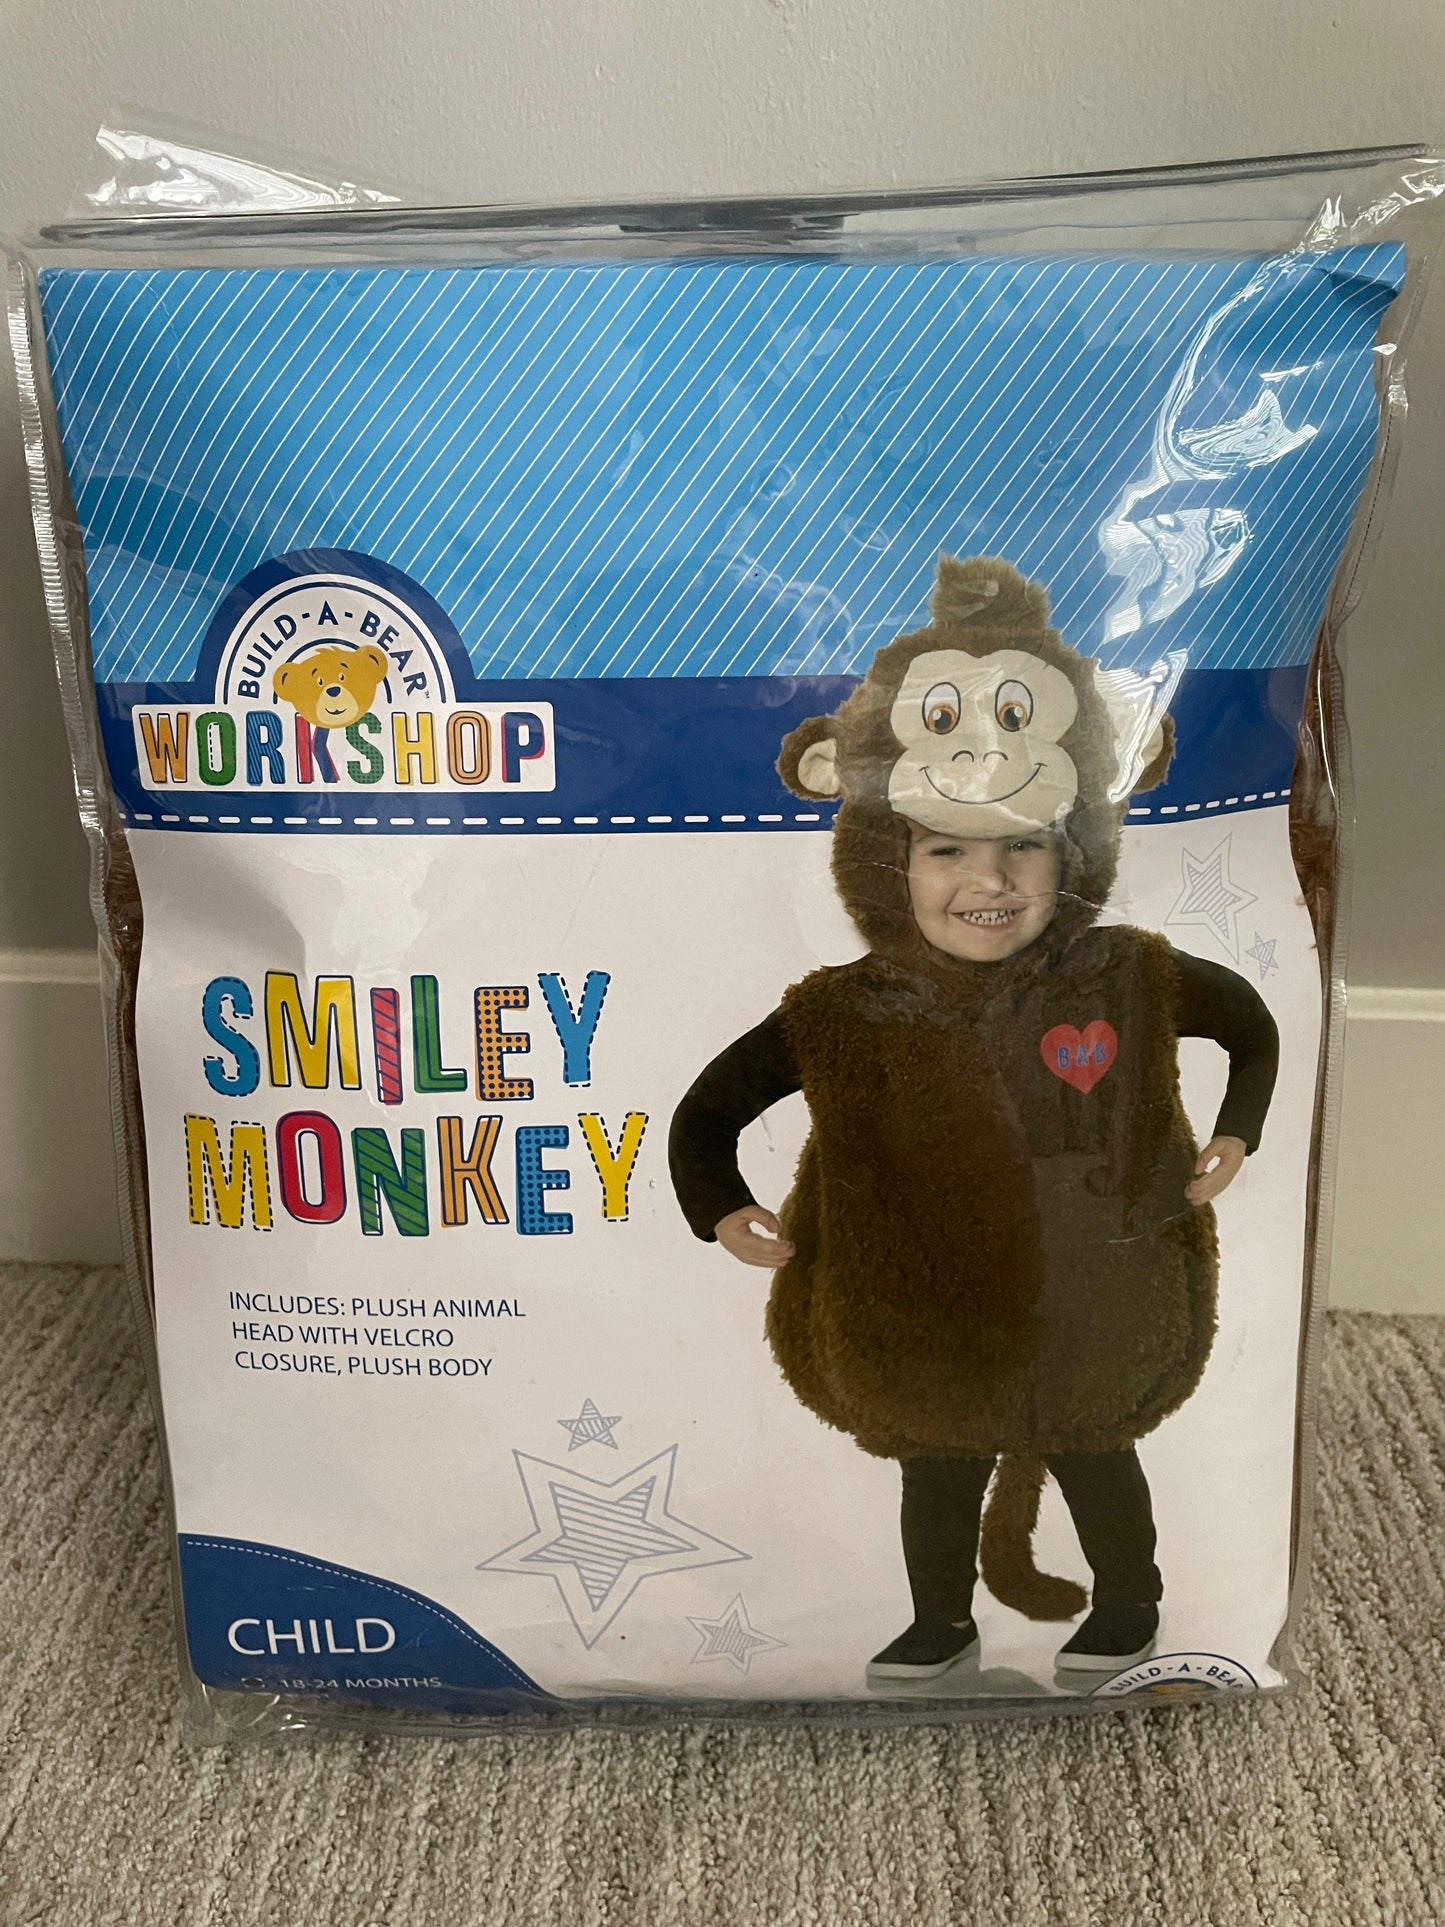 Smiley Monkey children's costume by Build-a-Bear Workshop